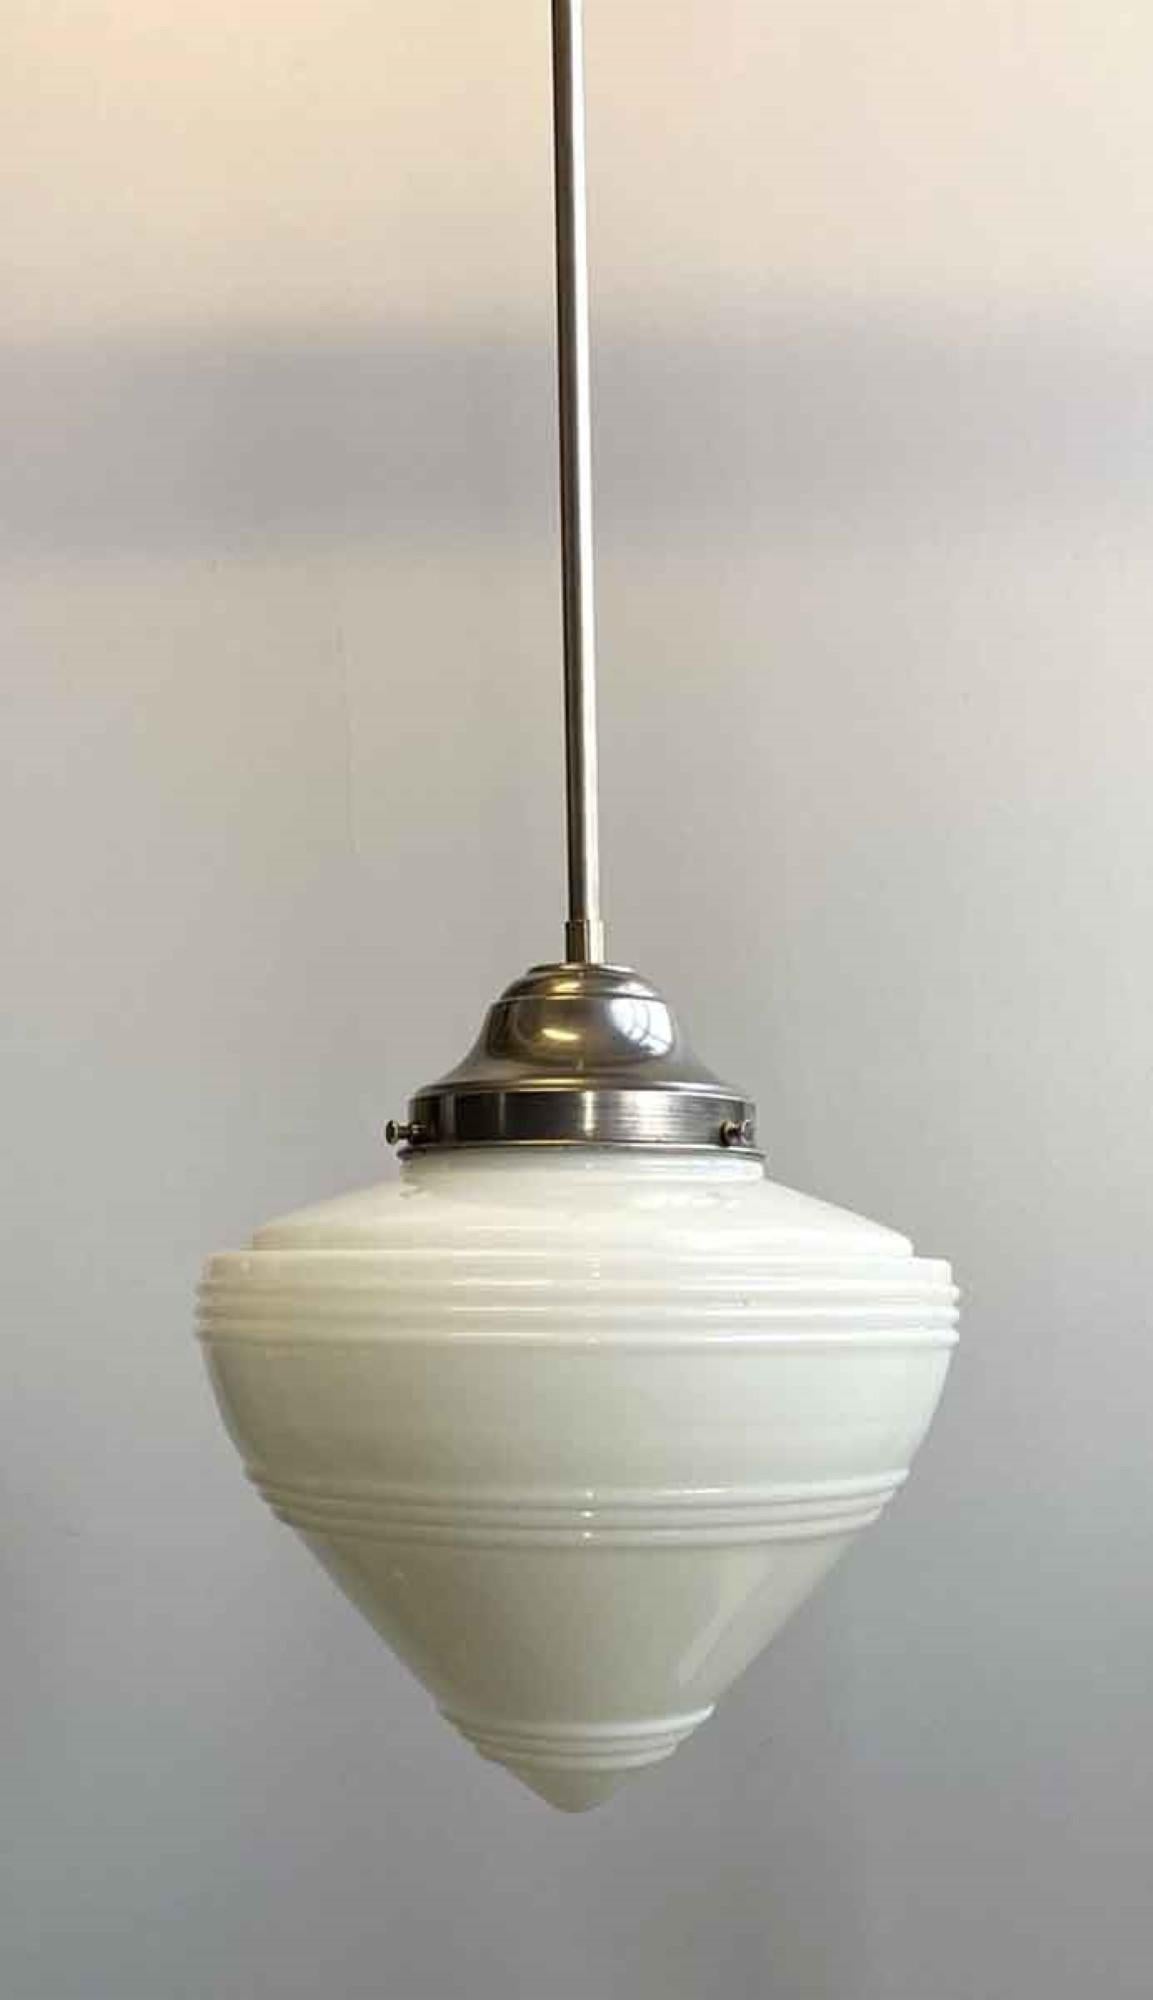 1940s Streamline style pendant light featuring a white cone shaped milk glass globe on a brushed steel fitter. This can be seen at our 400 Gilligan St location in Scranton. PA.